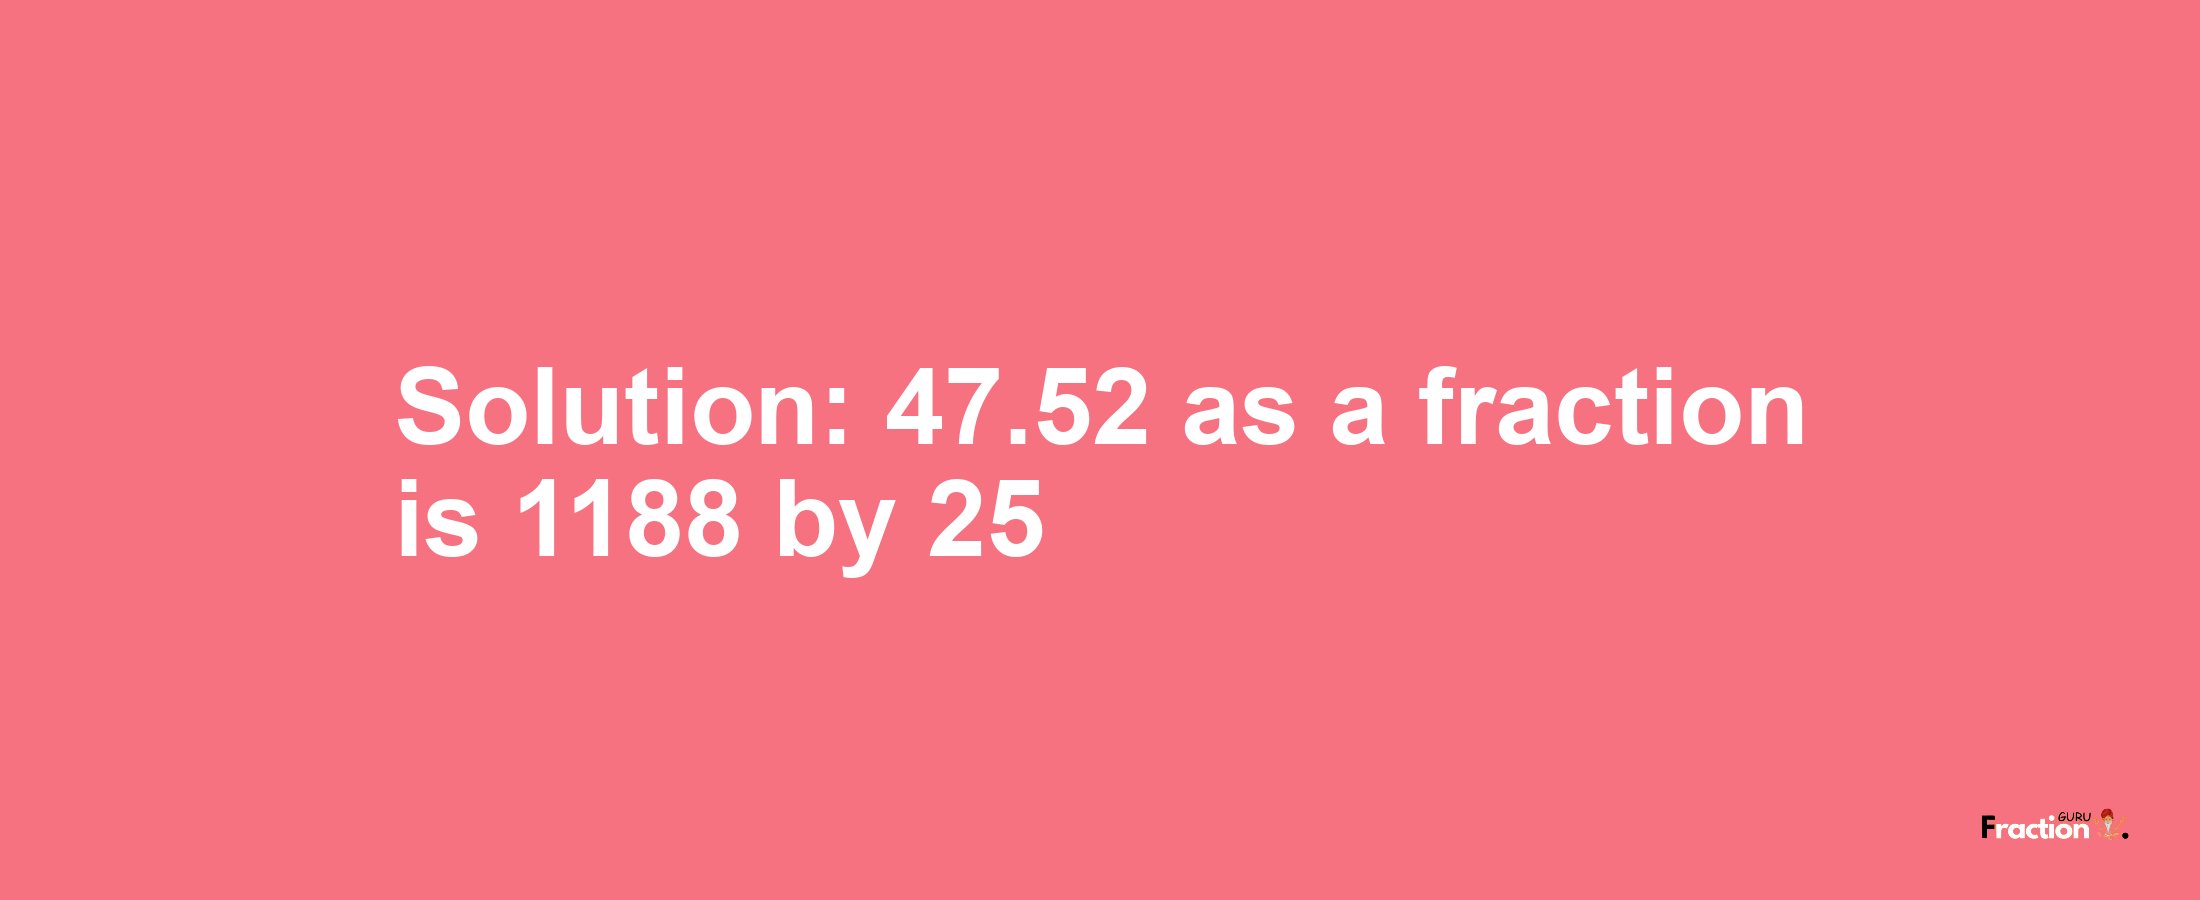 Solution:47.52 as a fraction is 1188/25